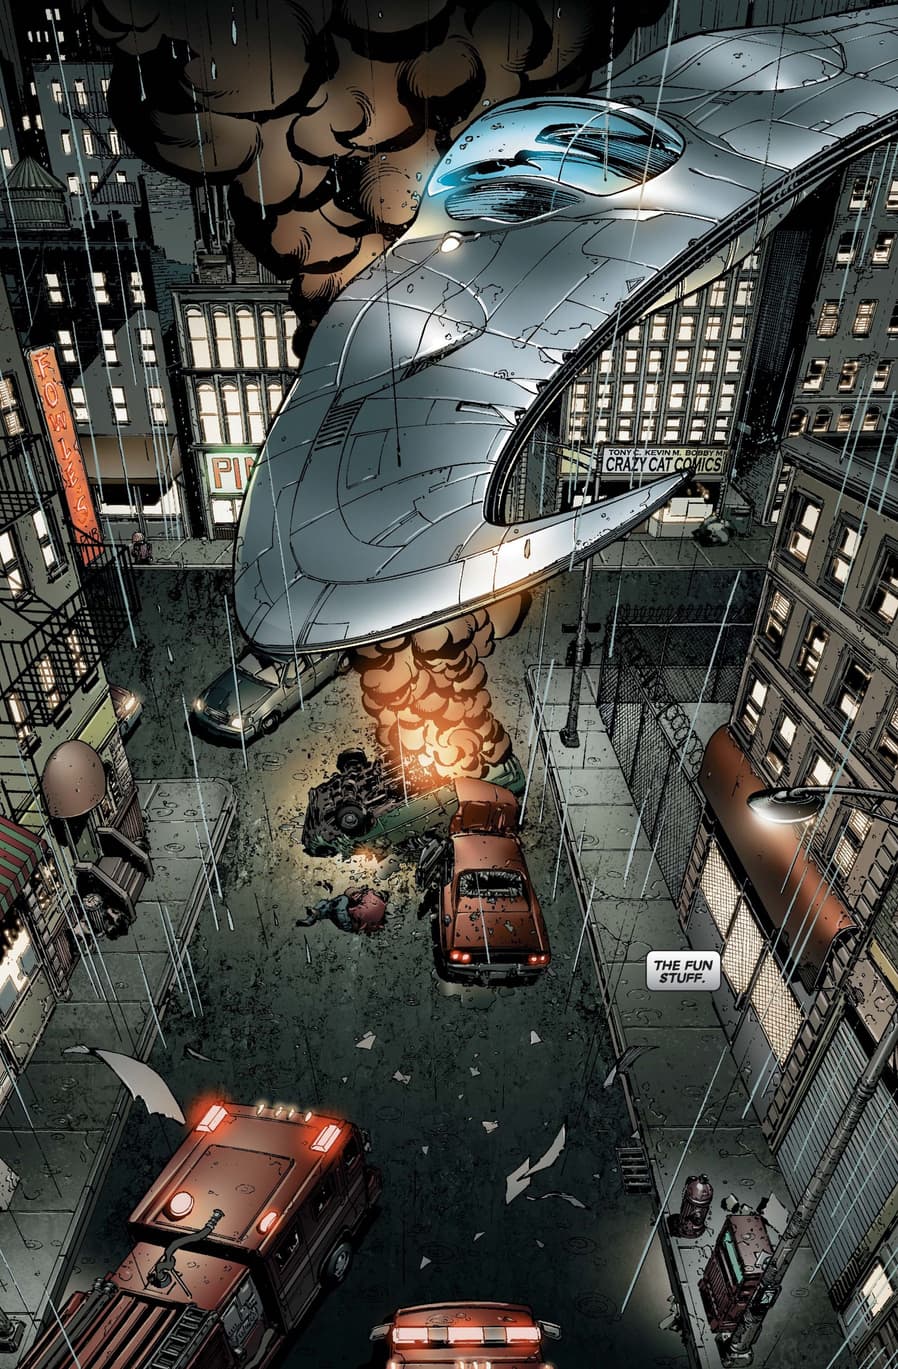 The Mooncopter in MOON KNIGHT (2006) #1.